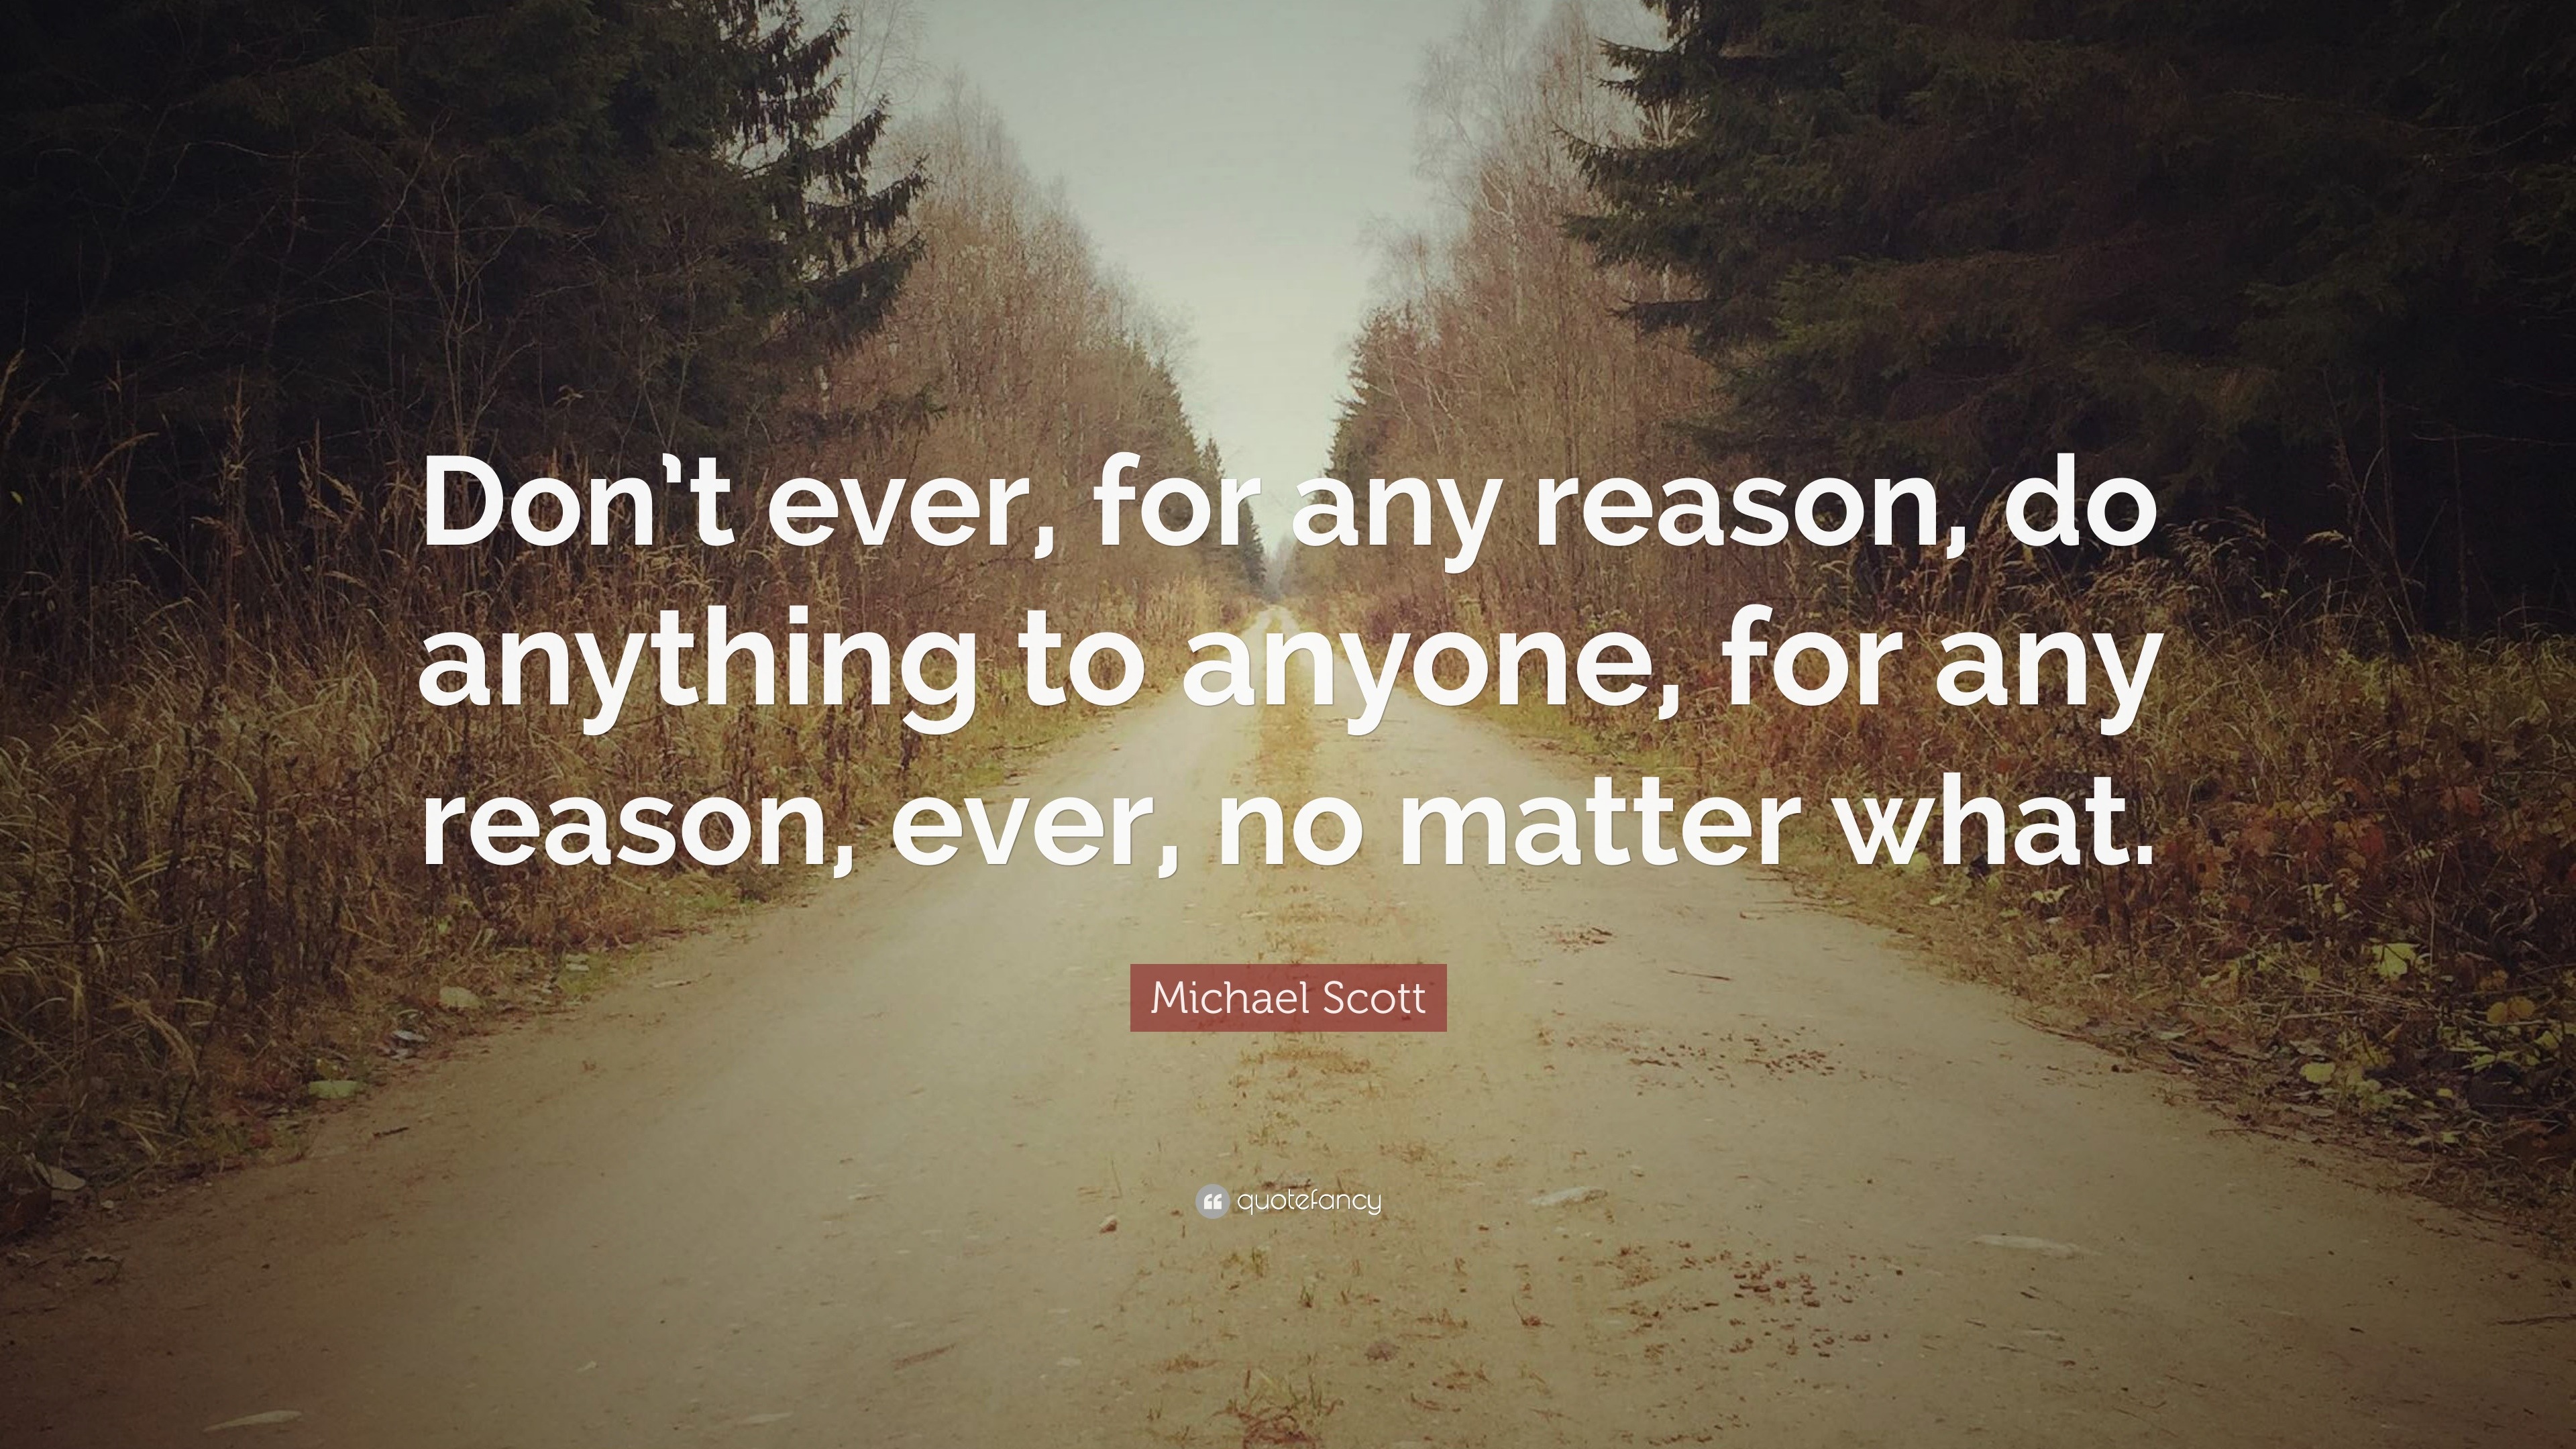 Michael Scott Quote “don’t Ever For Any Reason Do Anything To Anyone For Any Reason Ever